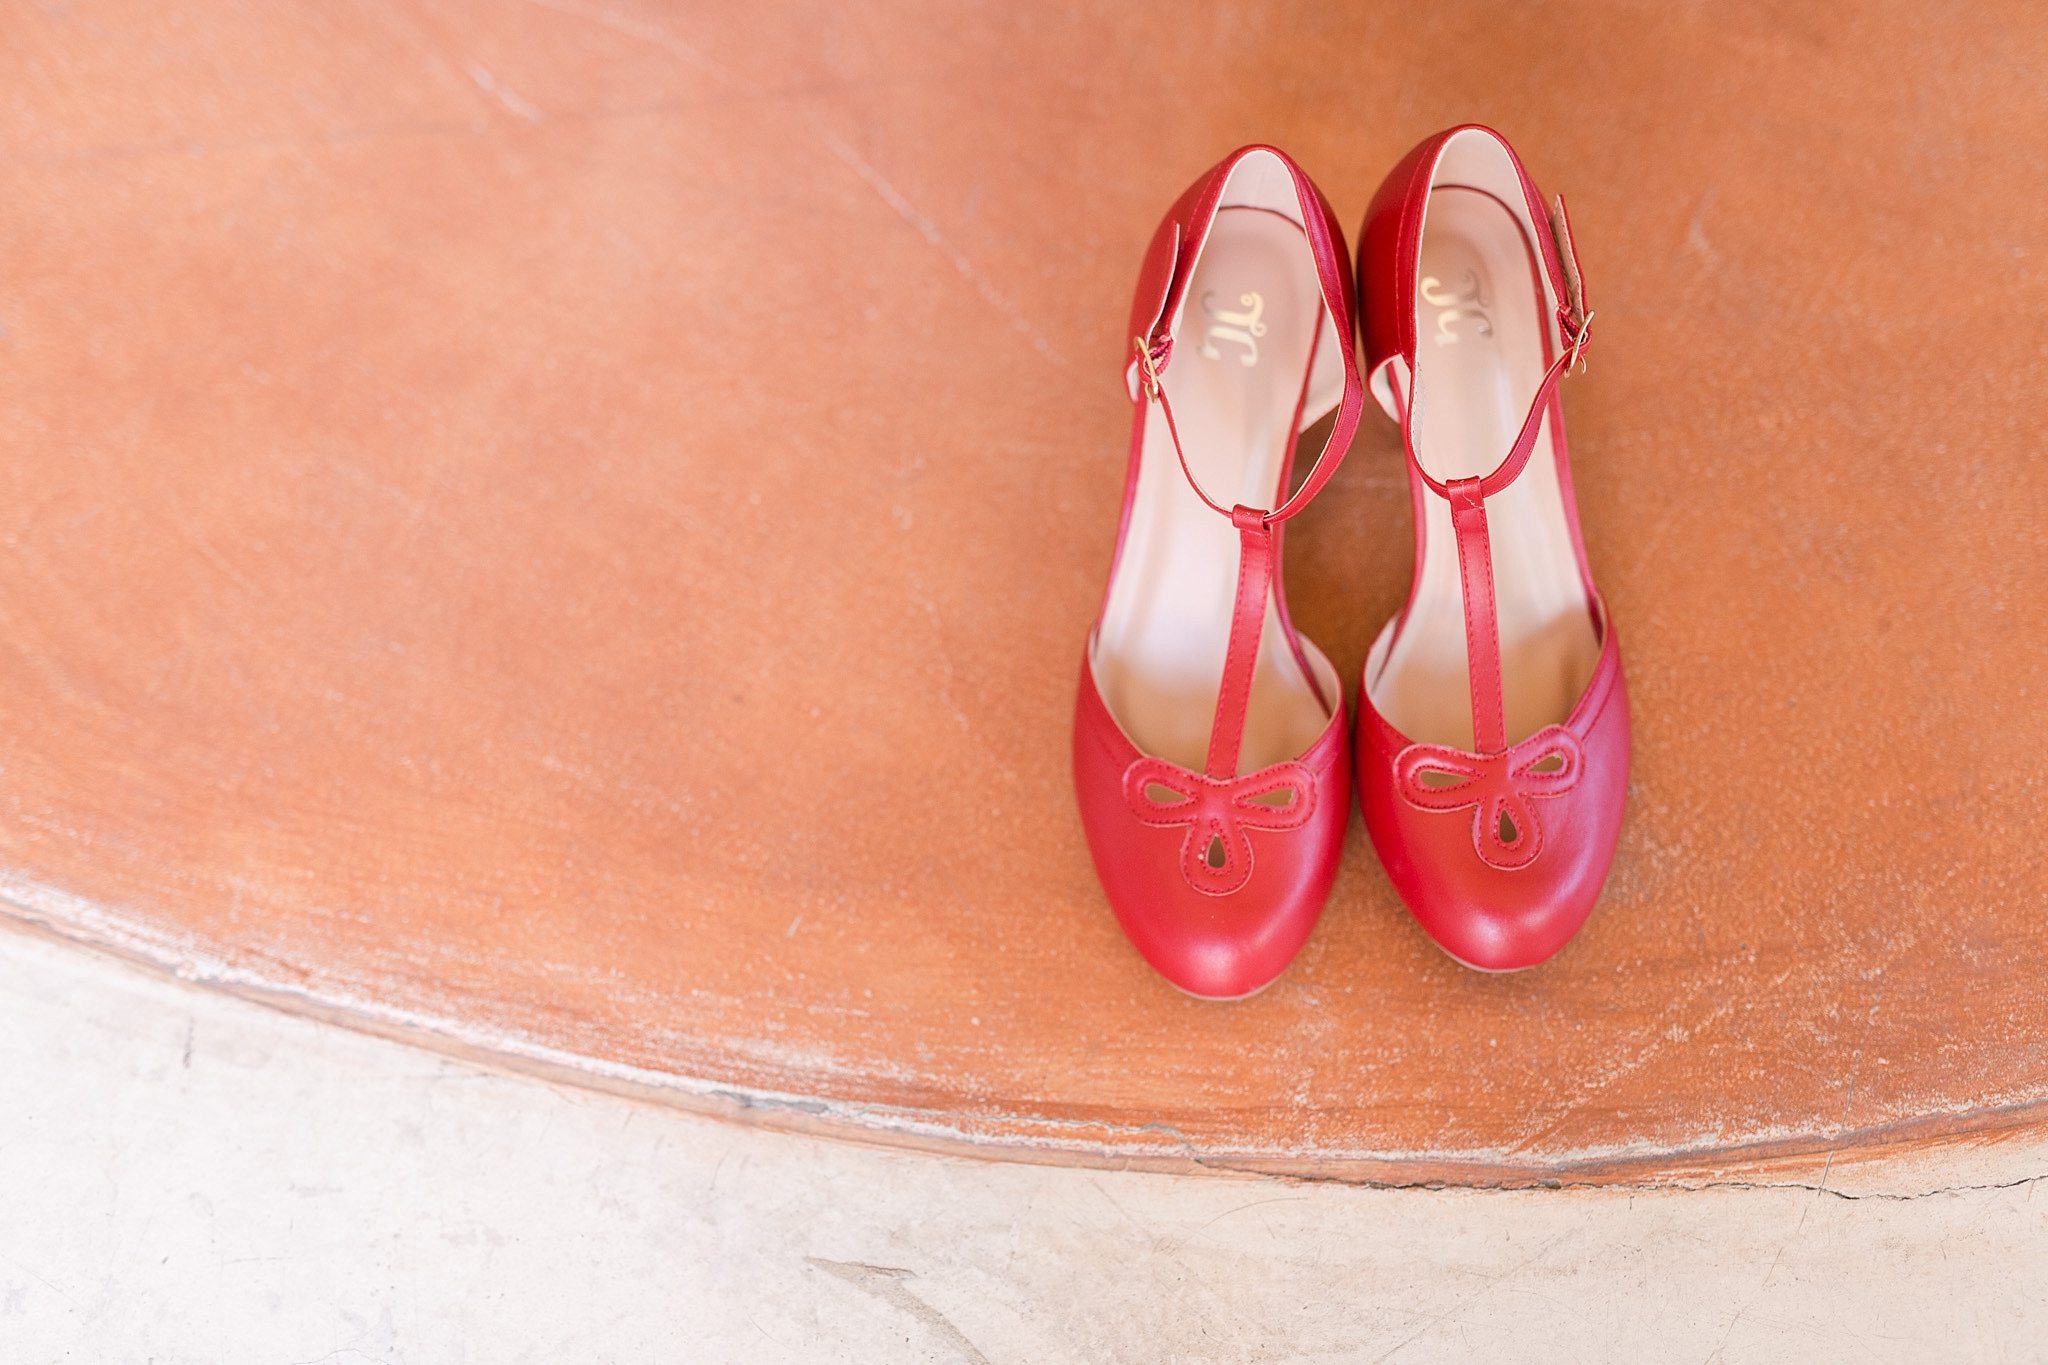 bridal shoes, wedding shoes, red wedding shoes